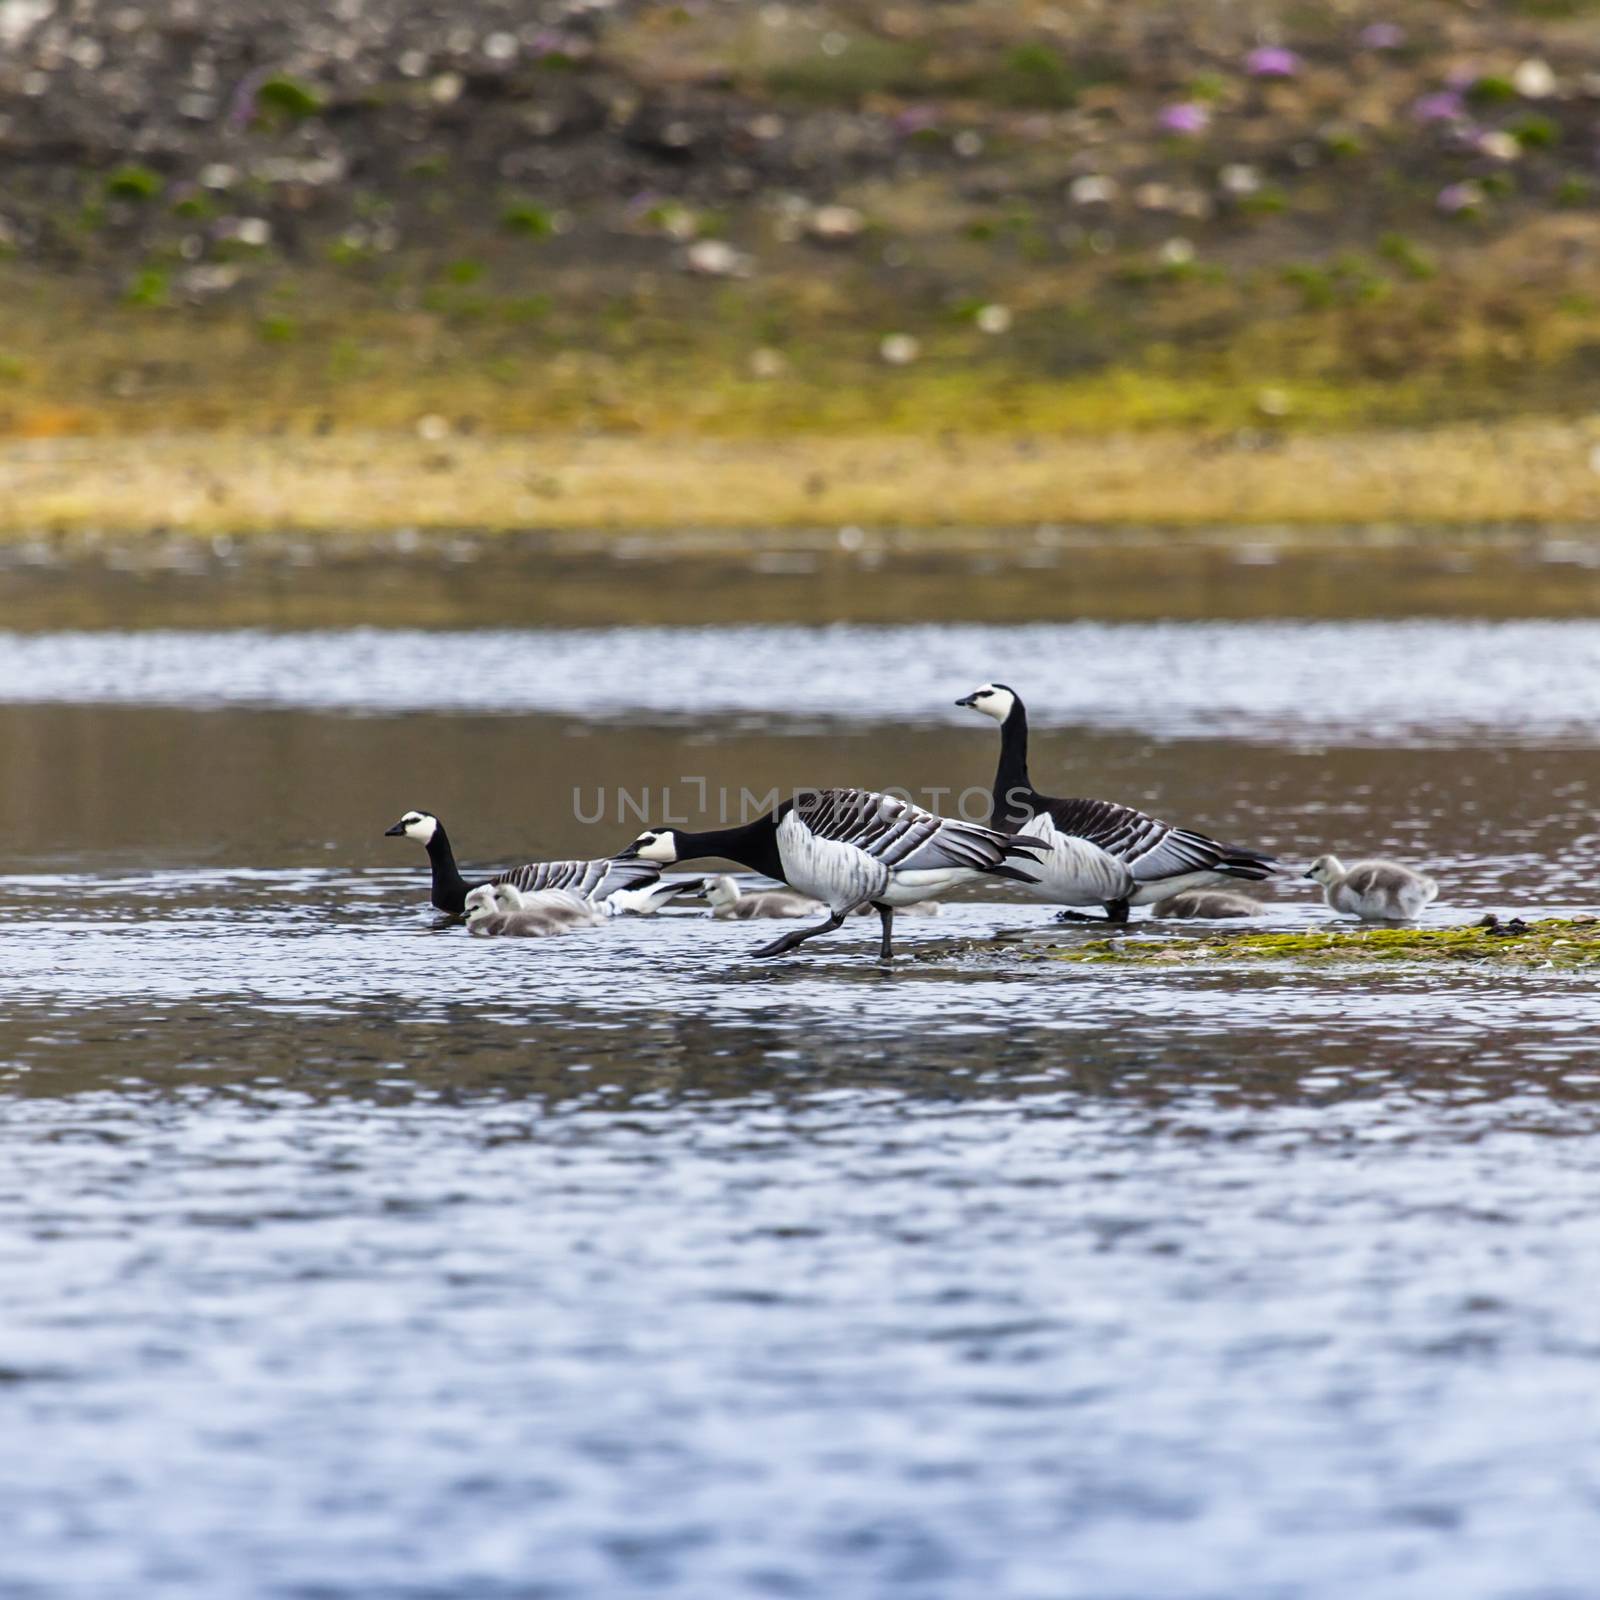 Group off Barnacle goose by mariusz_prusaczyk